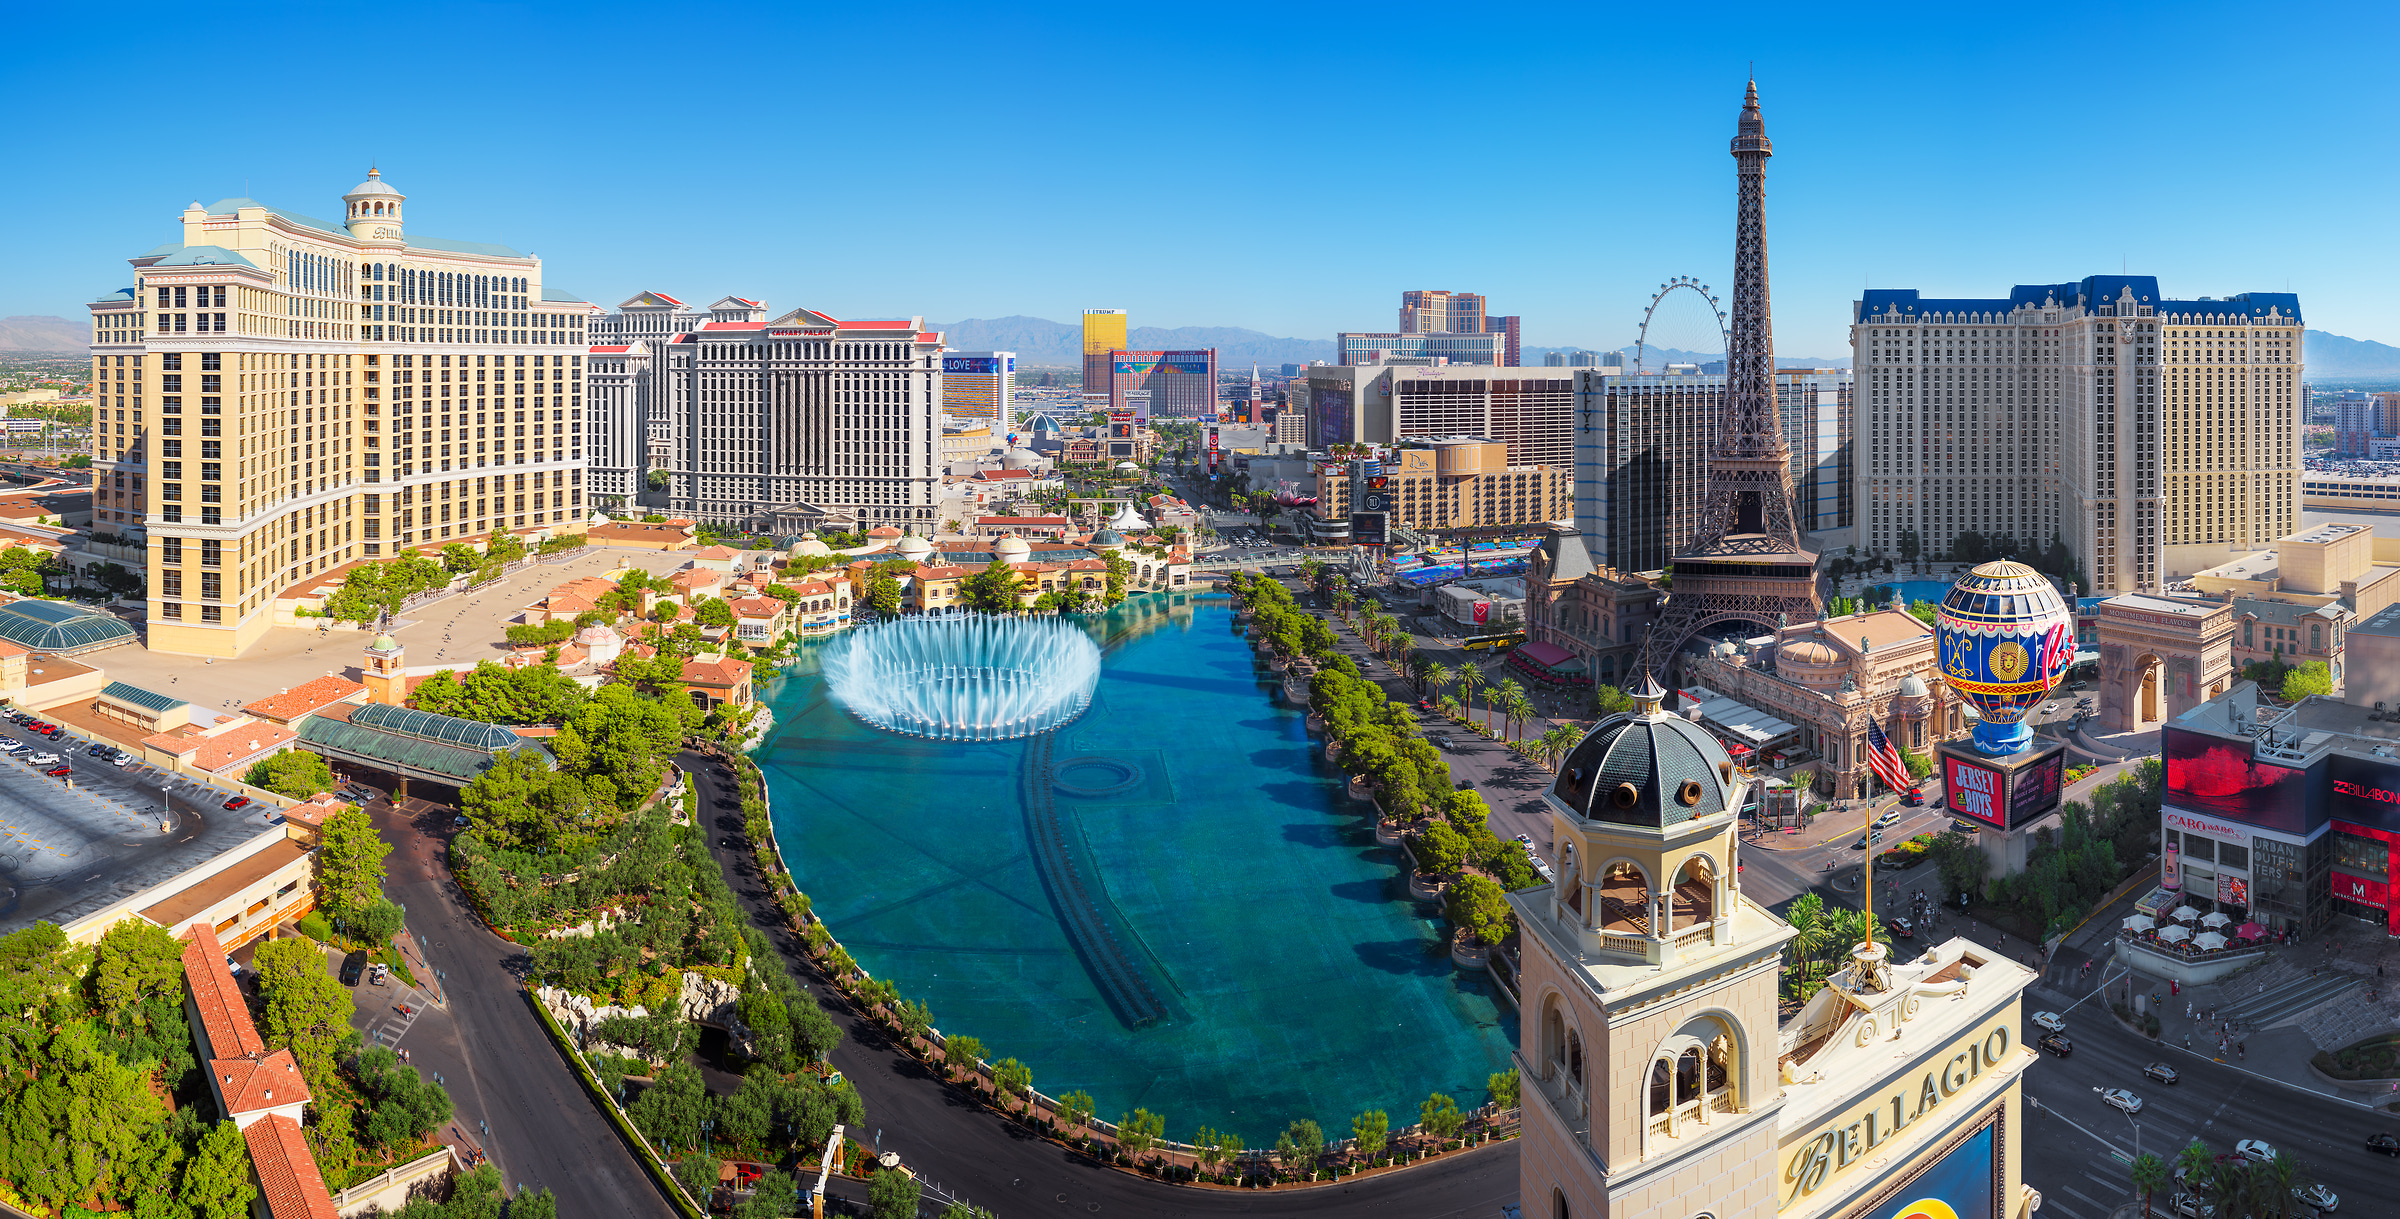 722 megapixels! A very high resolution, large-format VAST photo of the Las Vegas Strip skyline at daytime with casinos including Bellagio, Pairs; Ceasars Palace, The Venetian; cityscape photograph created by Jim Tarpo in Las Vegas, Nevada